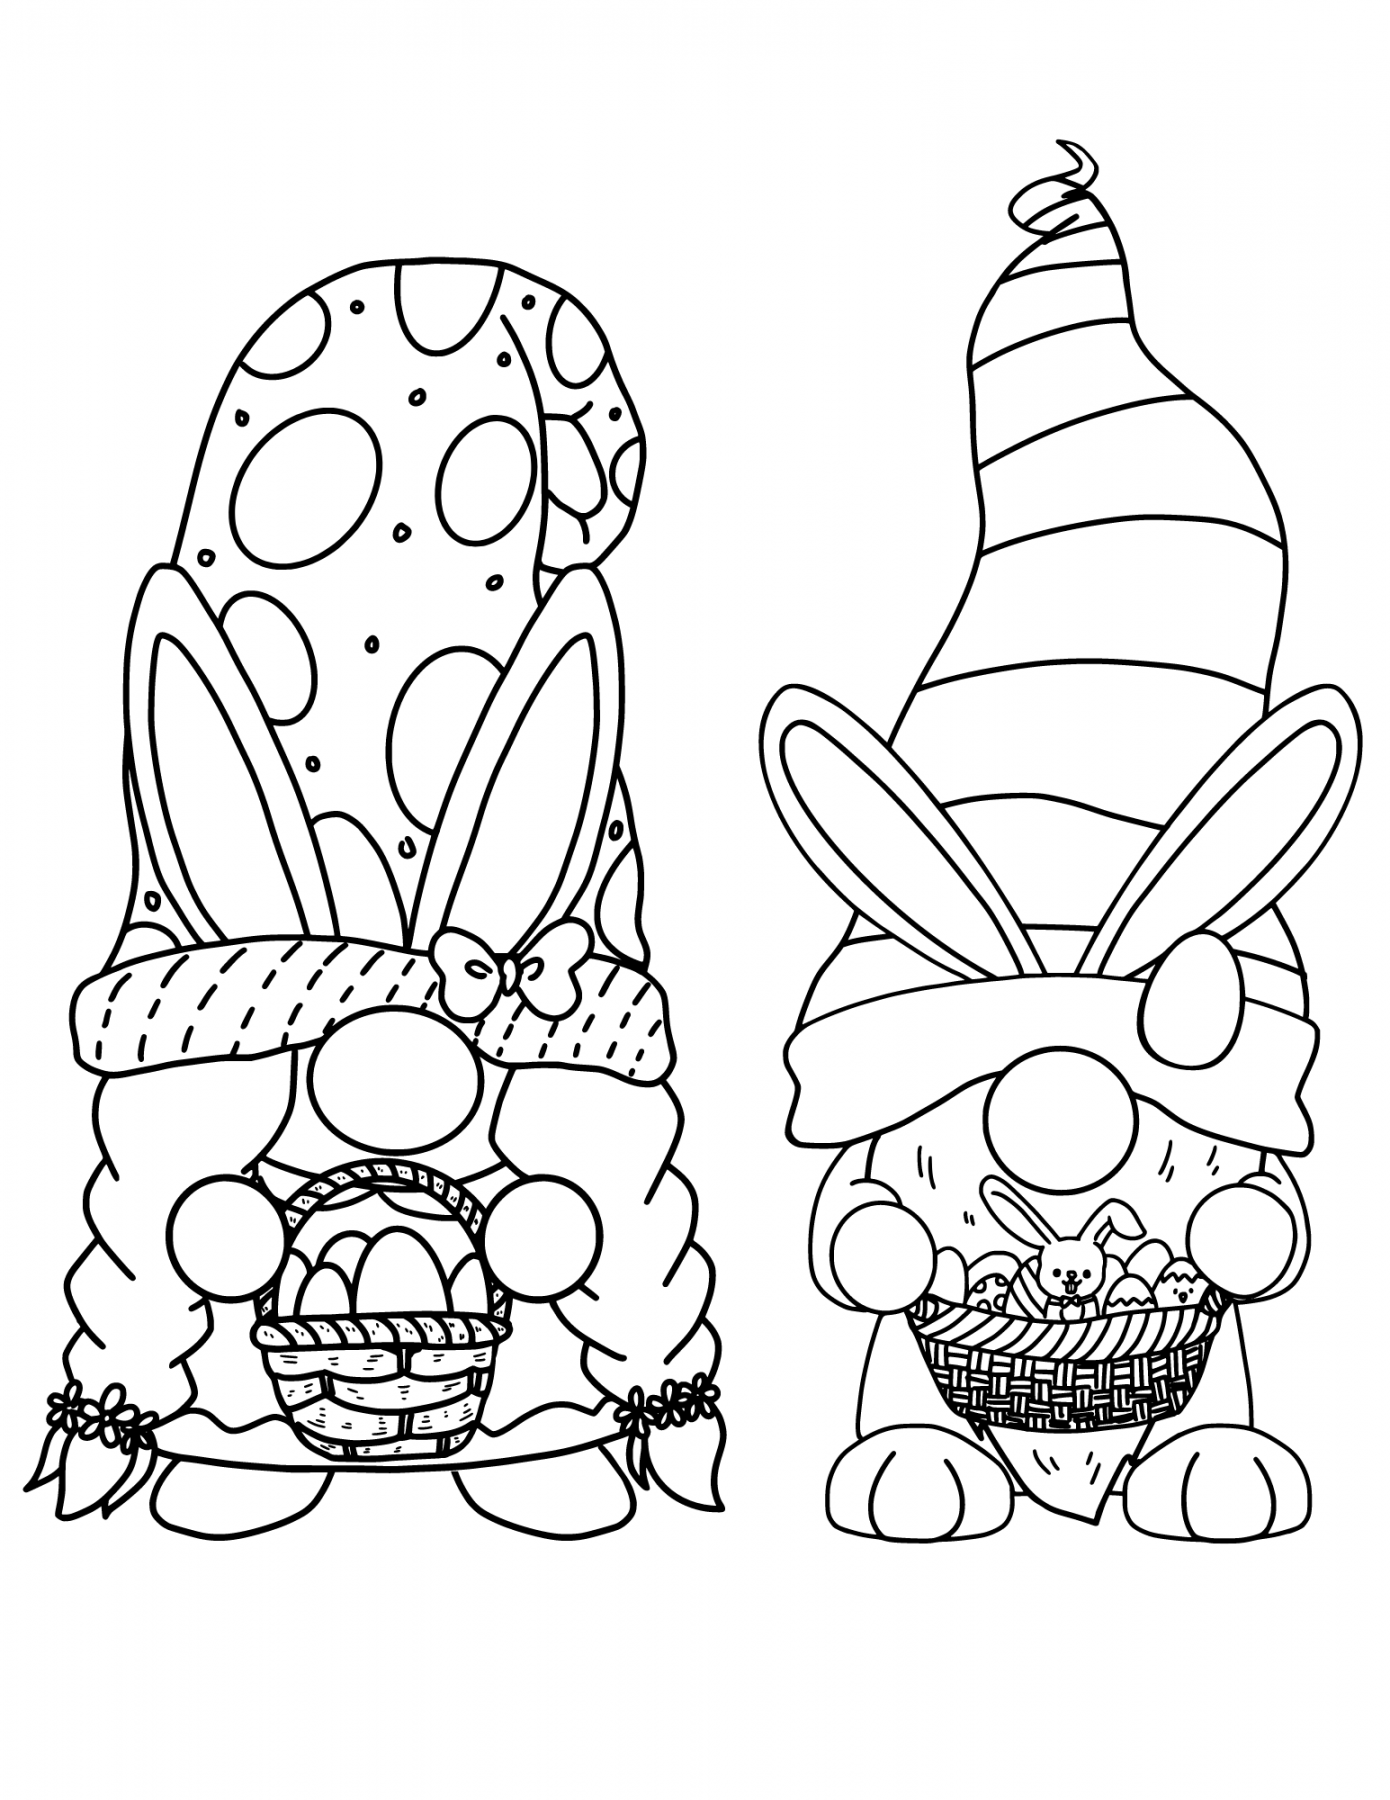 Free Printable Easter Gnomes Coloring Pages for Kids and Adults - FREE Printables - Free Printable Gnome Coloring Pages